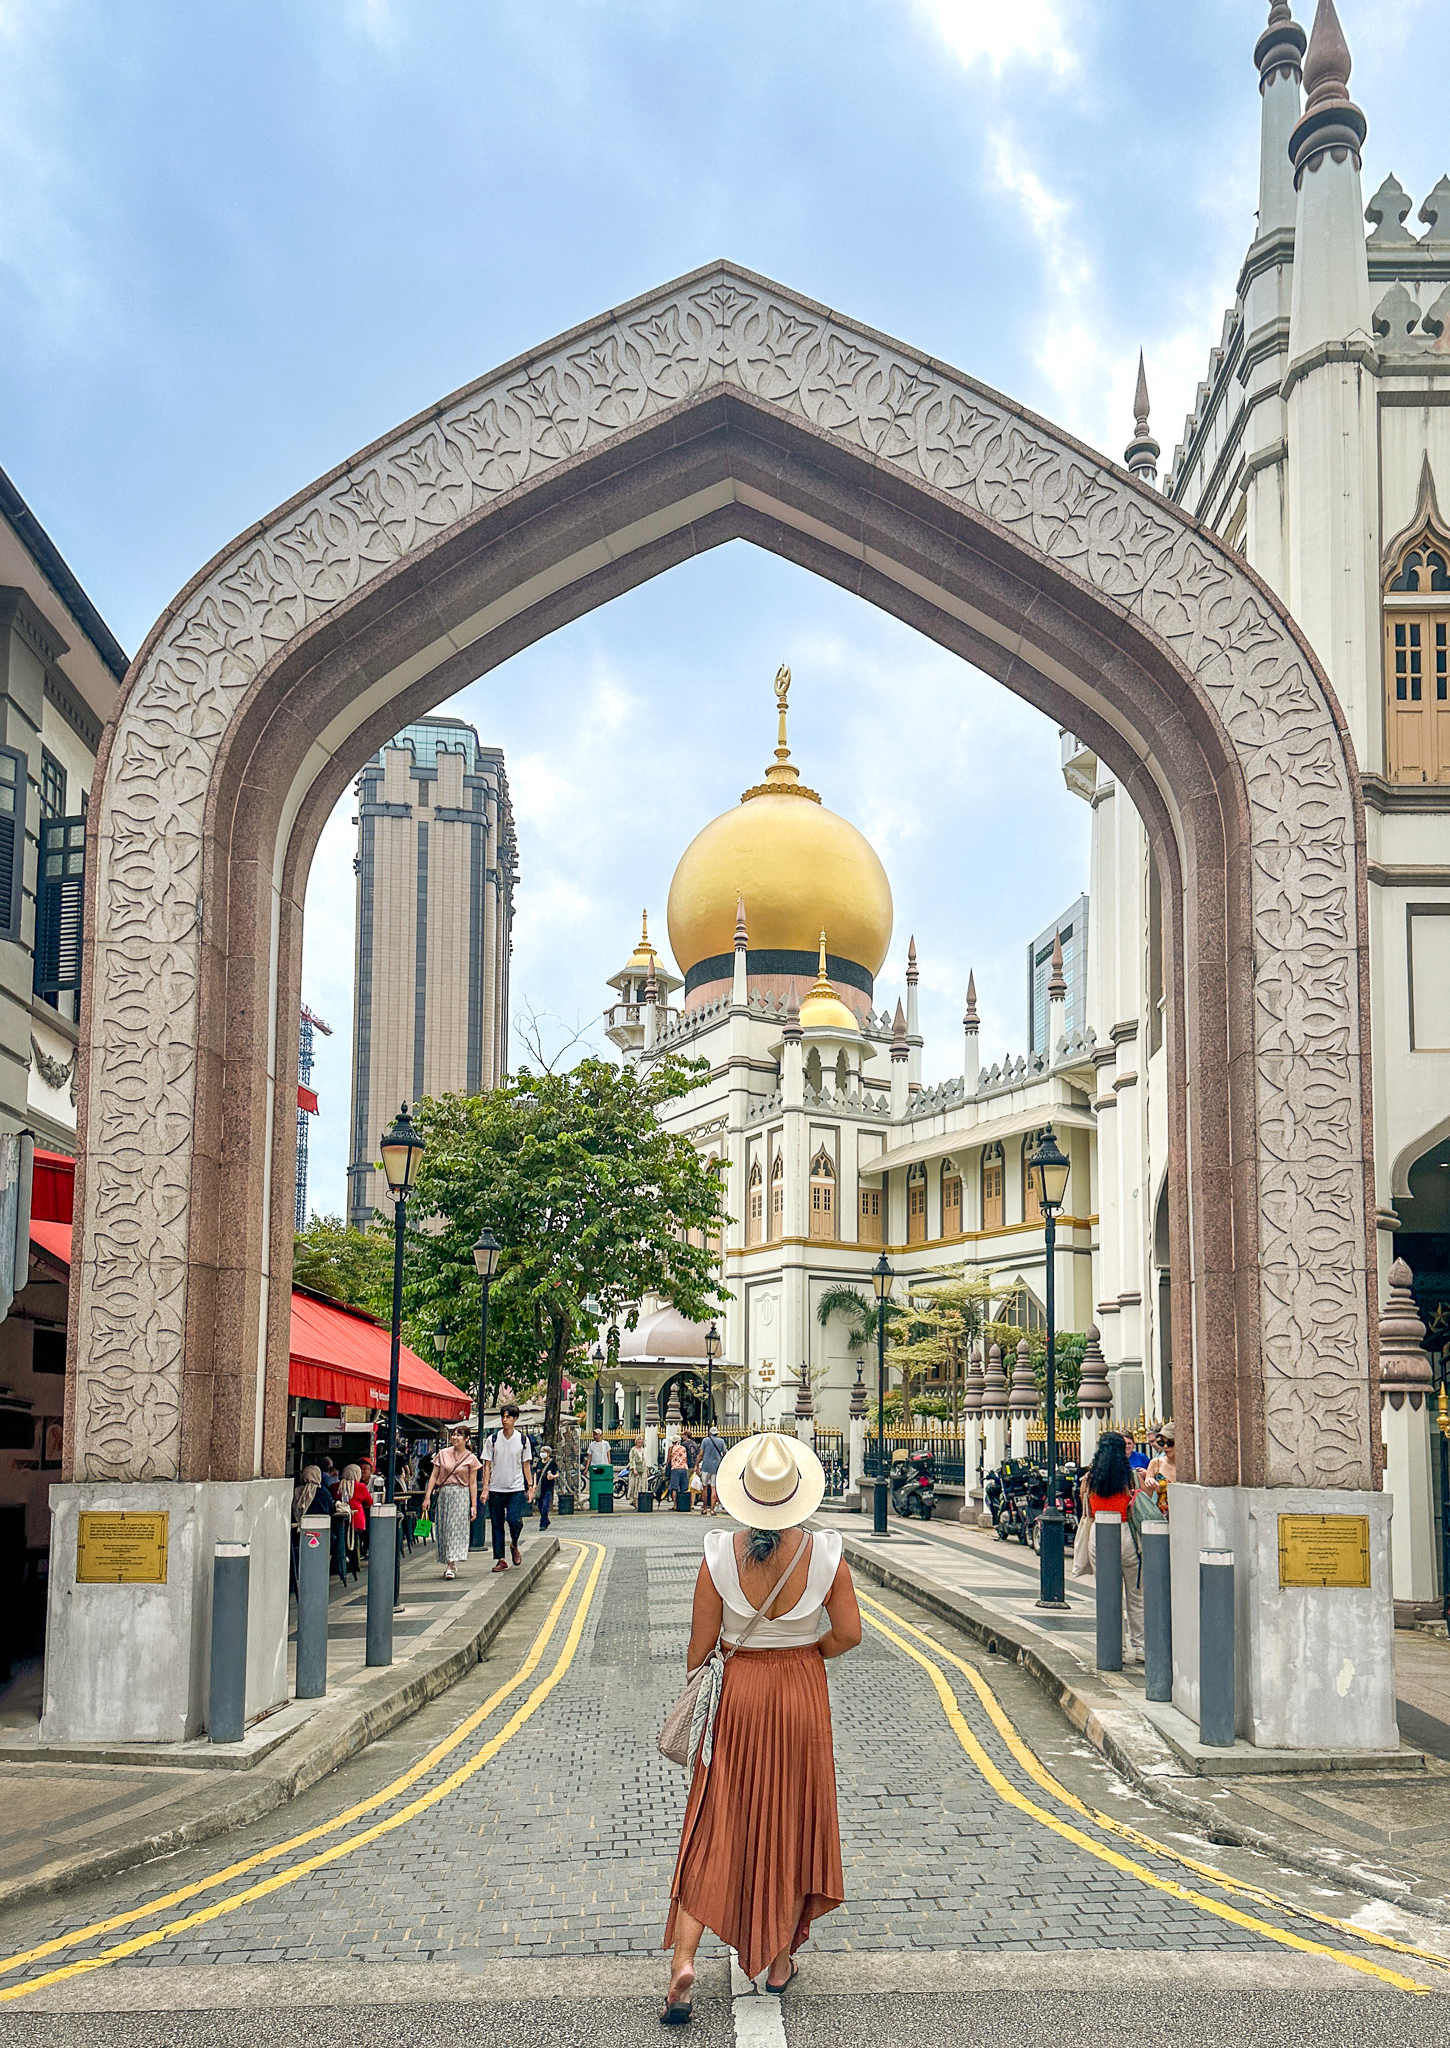 Golden domed Sultan Mosque Singapore American Hat Makers